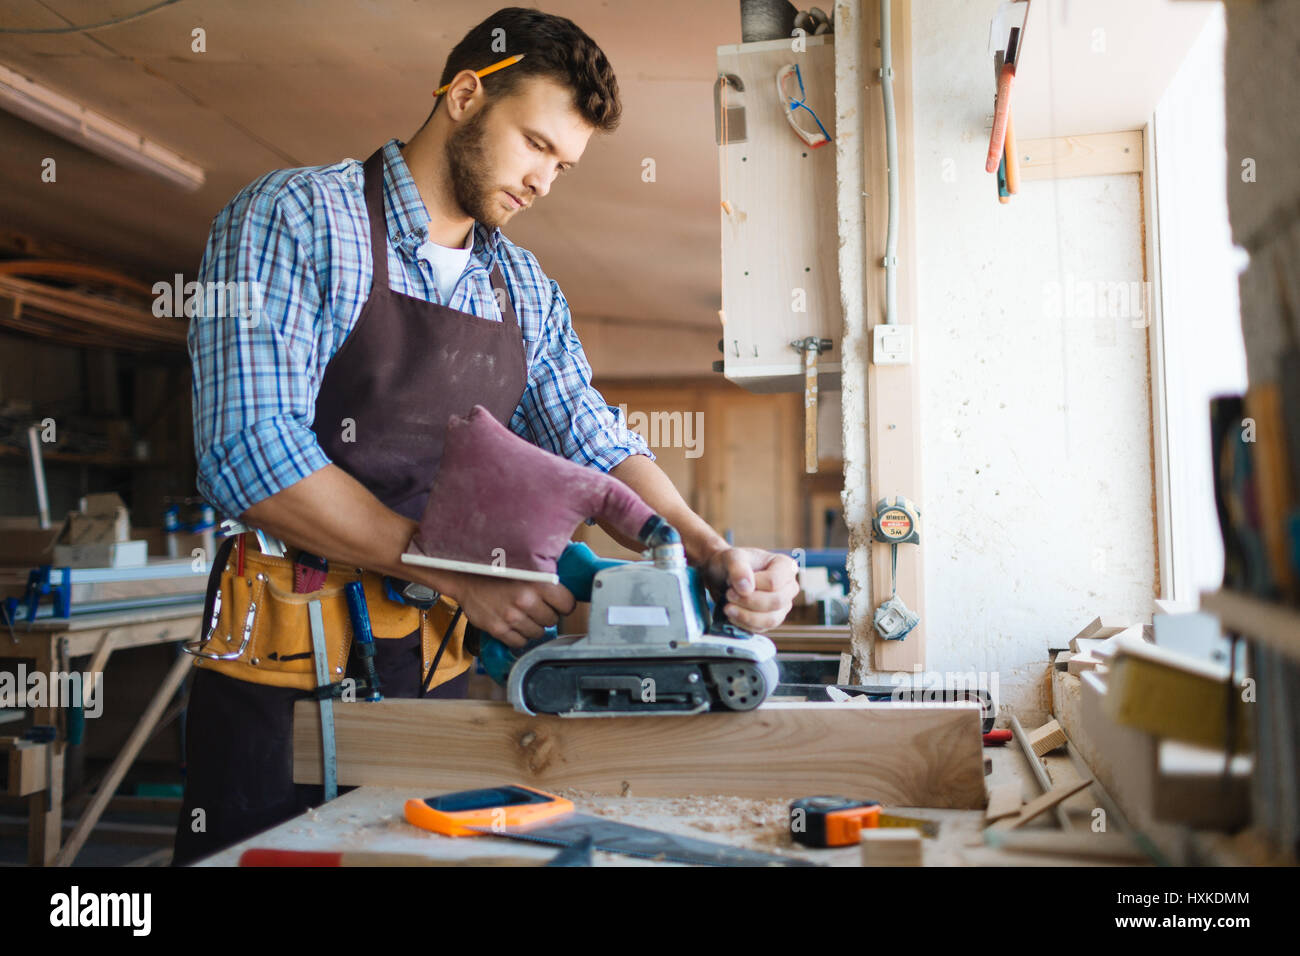 Work process in workshop Stock Photo